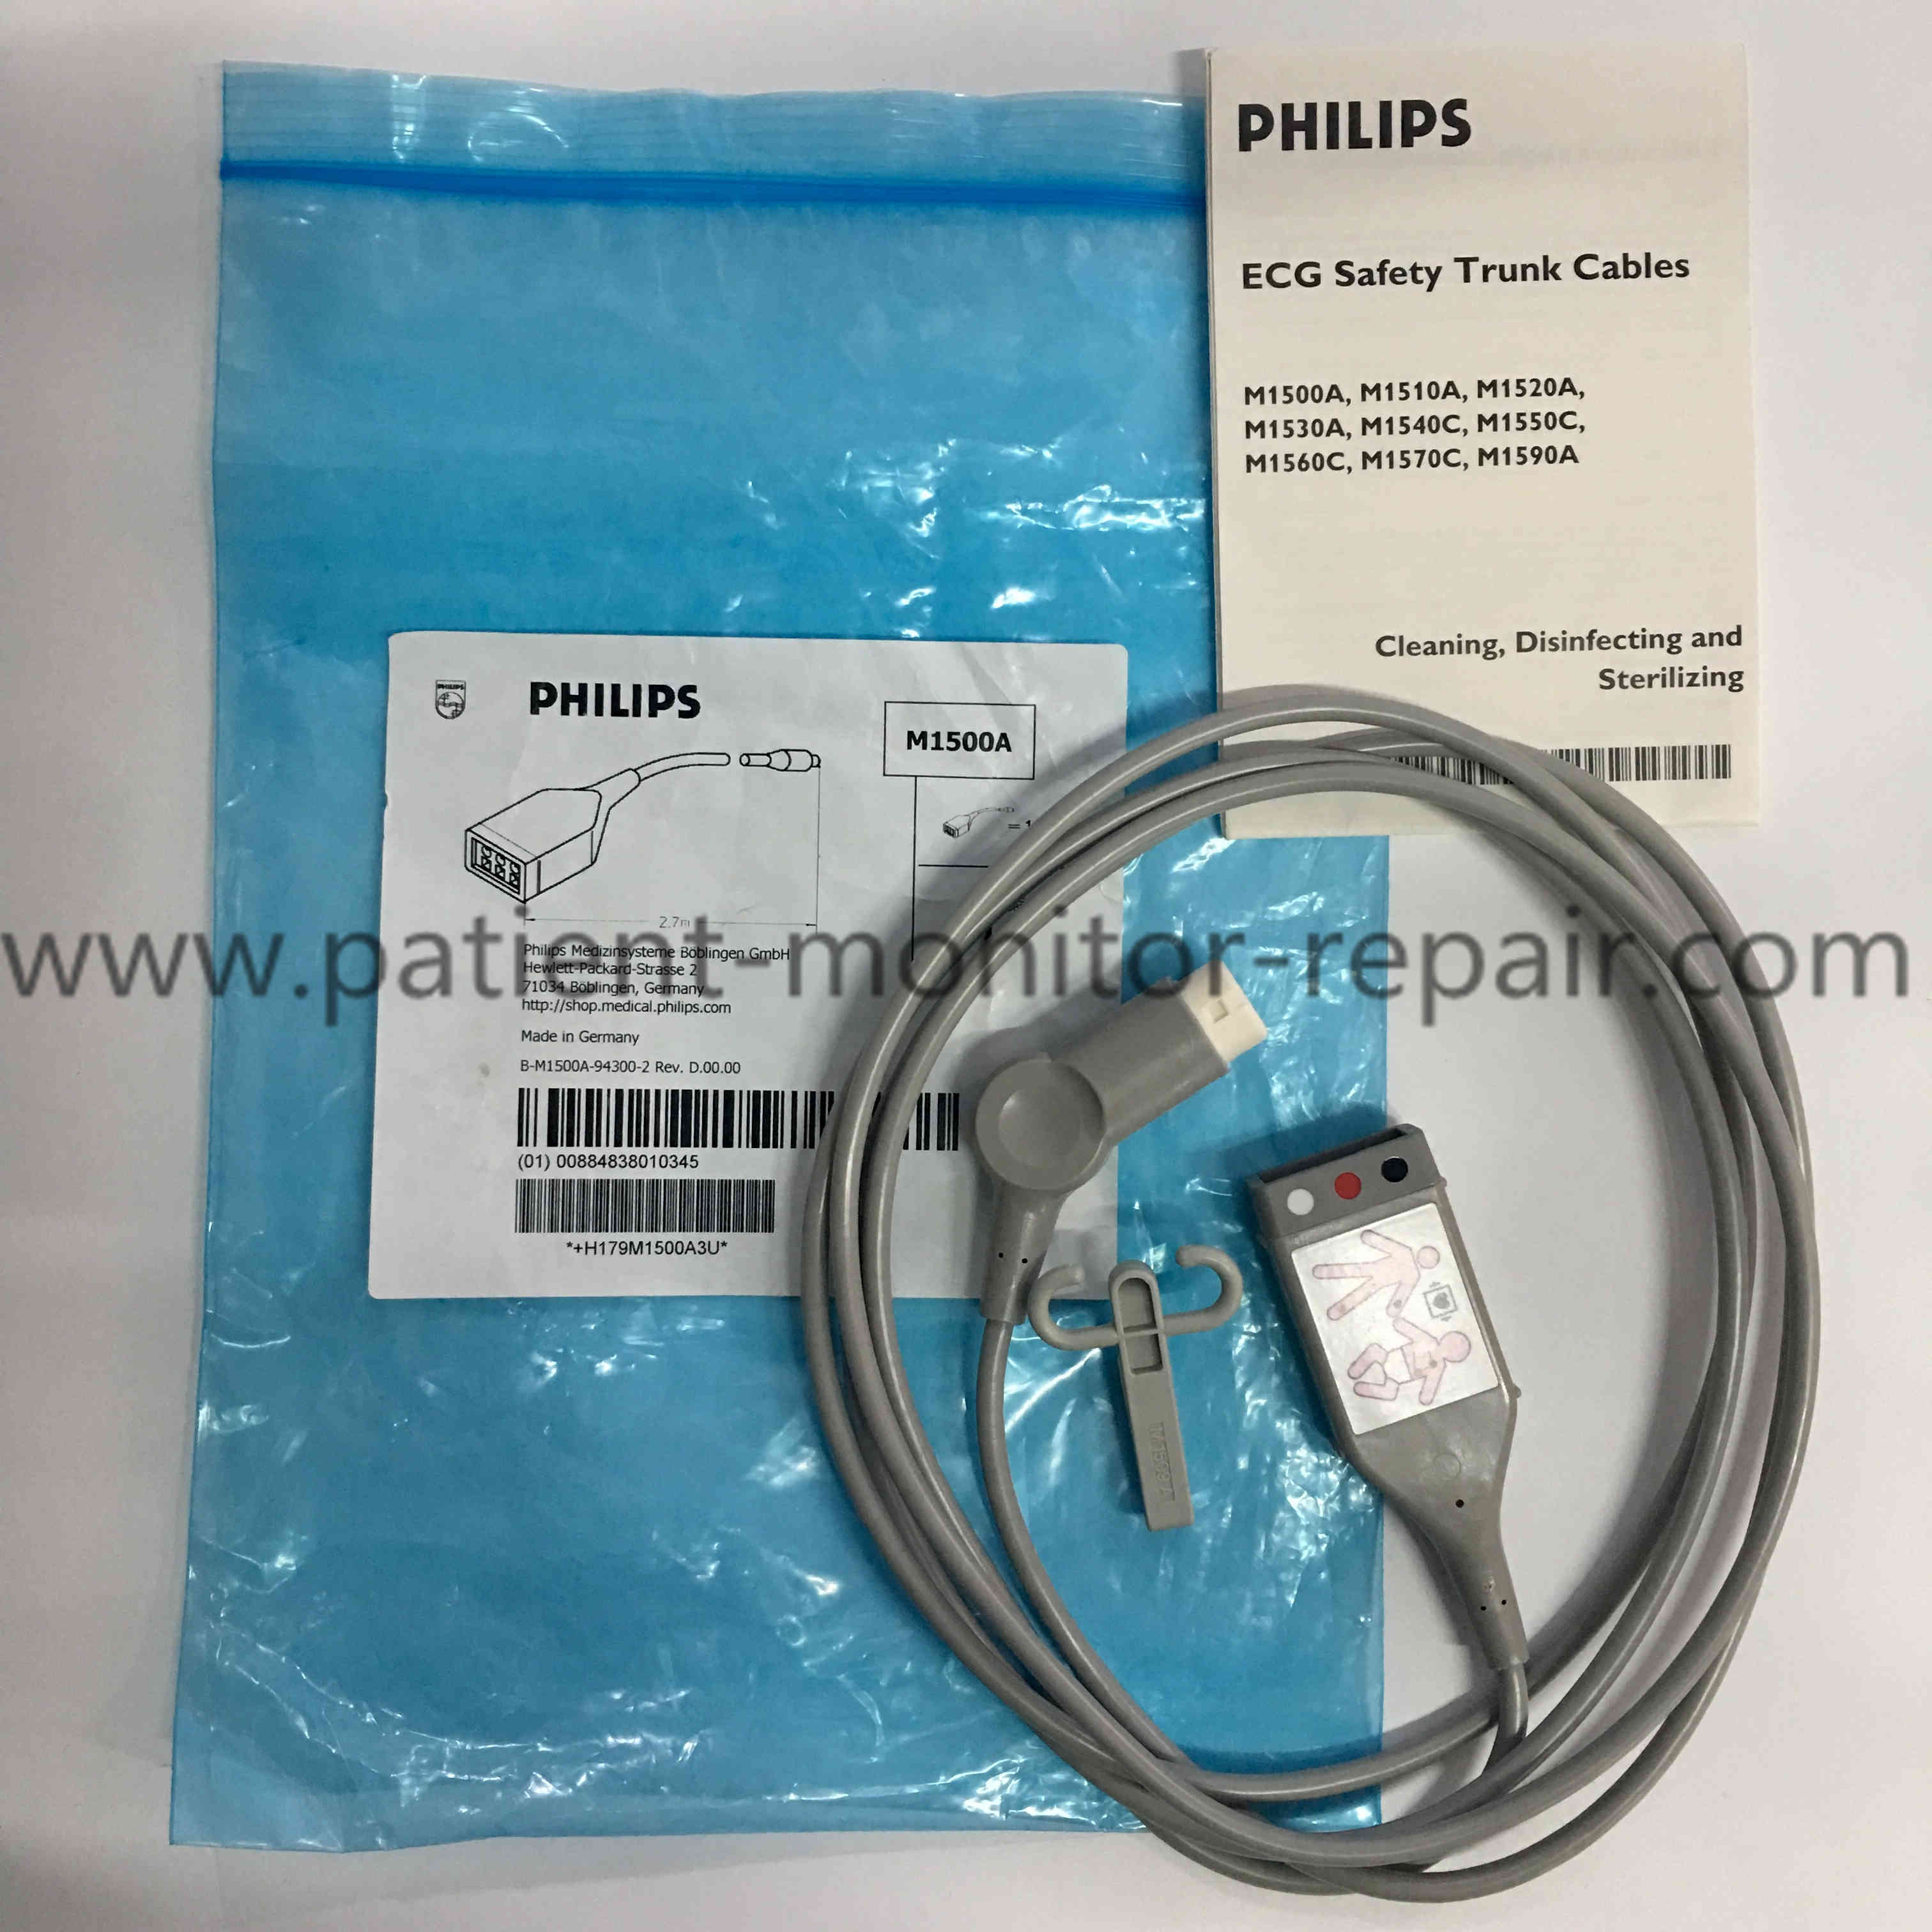 Philips ECG Safety Trunk Cables M1500A Ref 989803103811 - 1.jpg